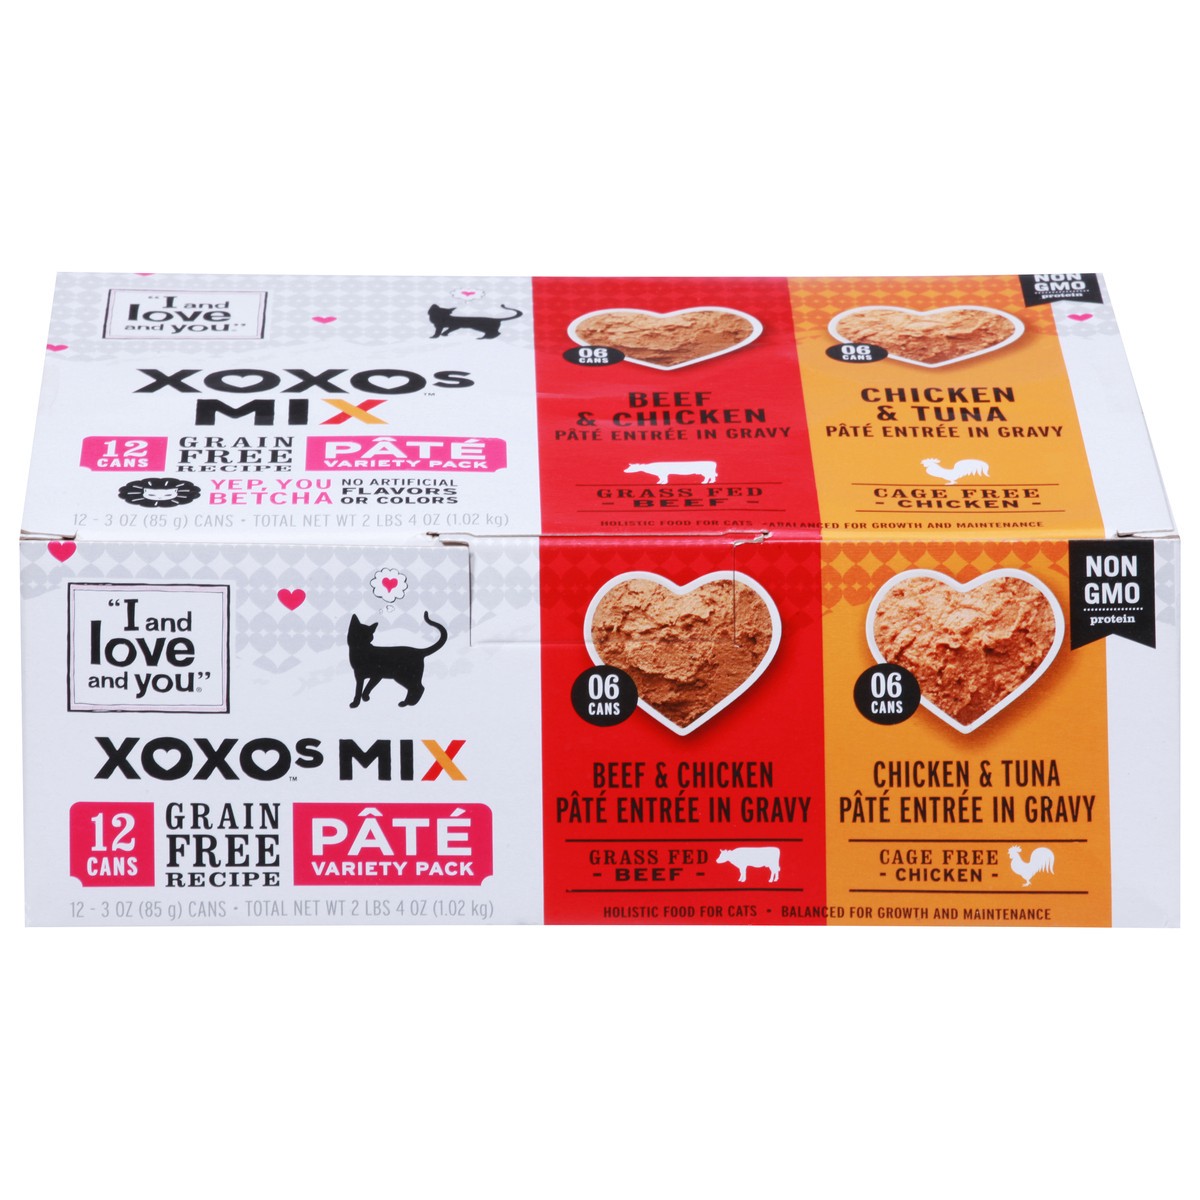 slide 1 of 13, I and Love and You XOXOs Mix Pate Grain Free Recipe Holistic Beef & Chicken/Chicken & Tuna Food for Cats Pate Variety Pack 12 - 3 oz Cans, 12 ct